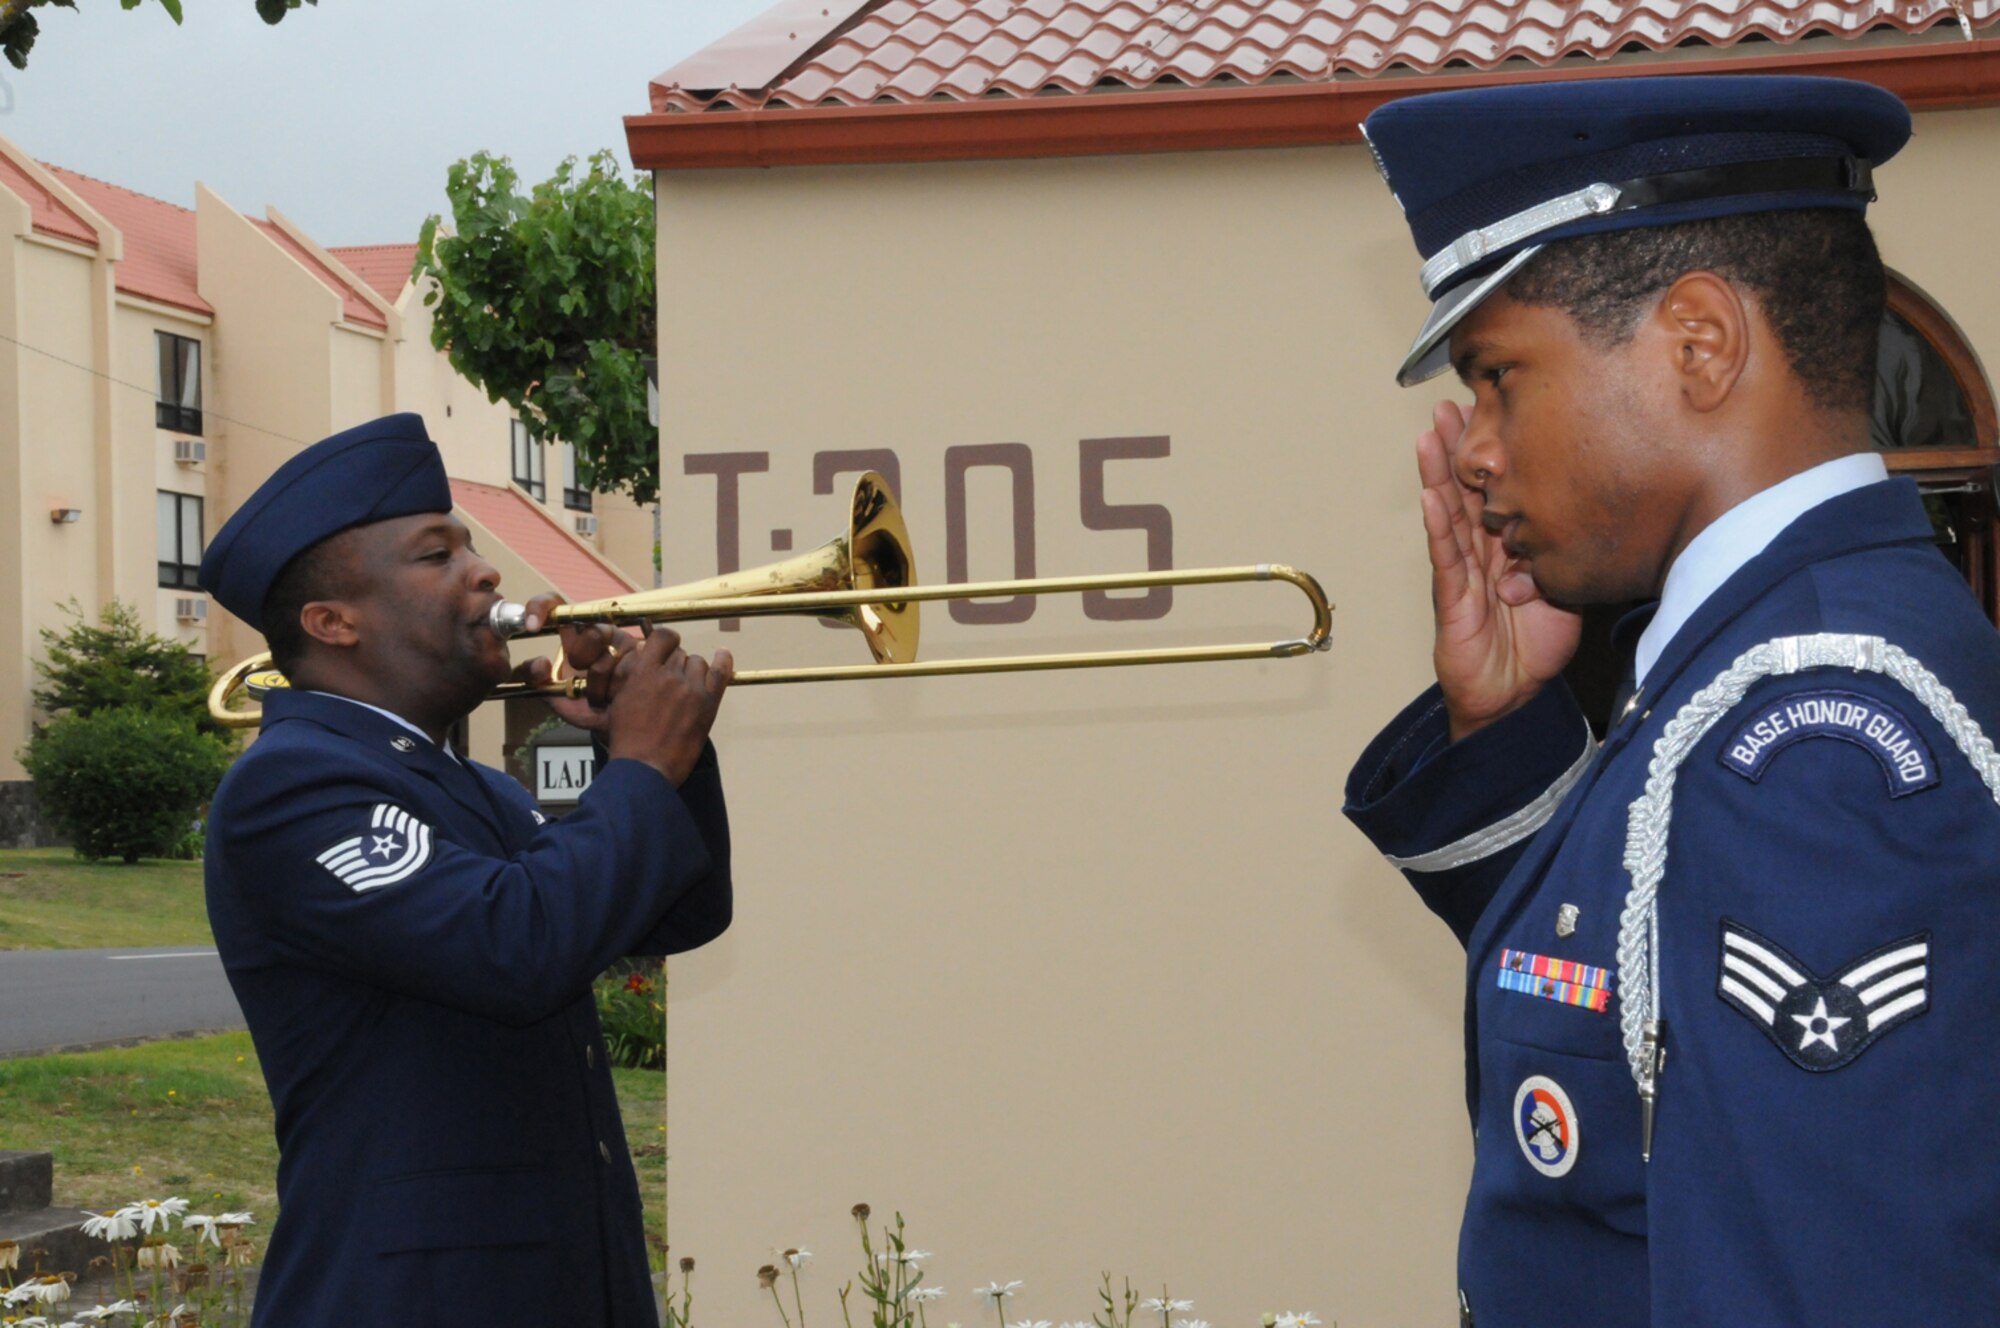 Tech. Sgt. Richard Williams, 65th Civil Engineer Squadron, plays Taps as Senior Airman John Parker, 65th Medical Operations Squadron, salutes during the memorial service in honor of Senior Airman Amber Finnel, 65th Security Forces Squadron, at Lajes Field July 2. Airman Finnell was from East Tawas, Mich. and entered the Air Force in Feb. 2004.  She had been previously stationed at Minot AFB, N.D. and Sather AB, Baghdad, Iraq; she passed away on June 30, 2009.  (U.S. Air Force photo by Tech Sgt. Rebecca F. Corey)